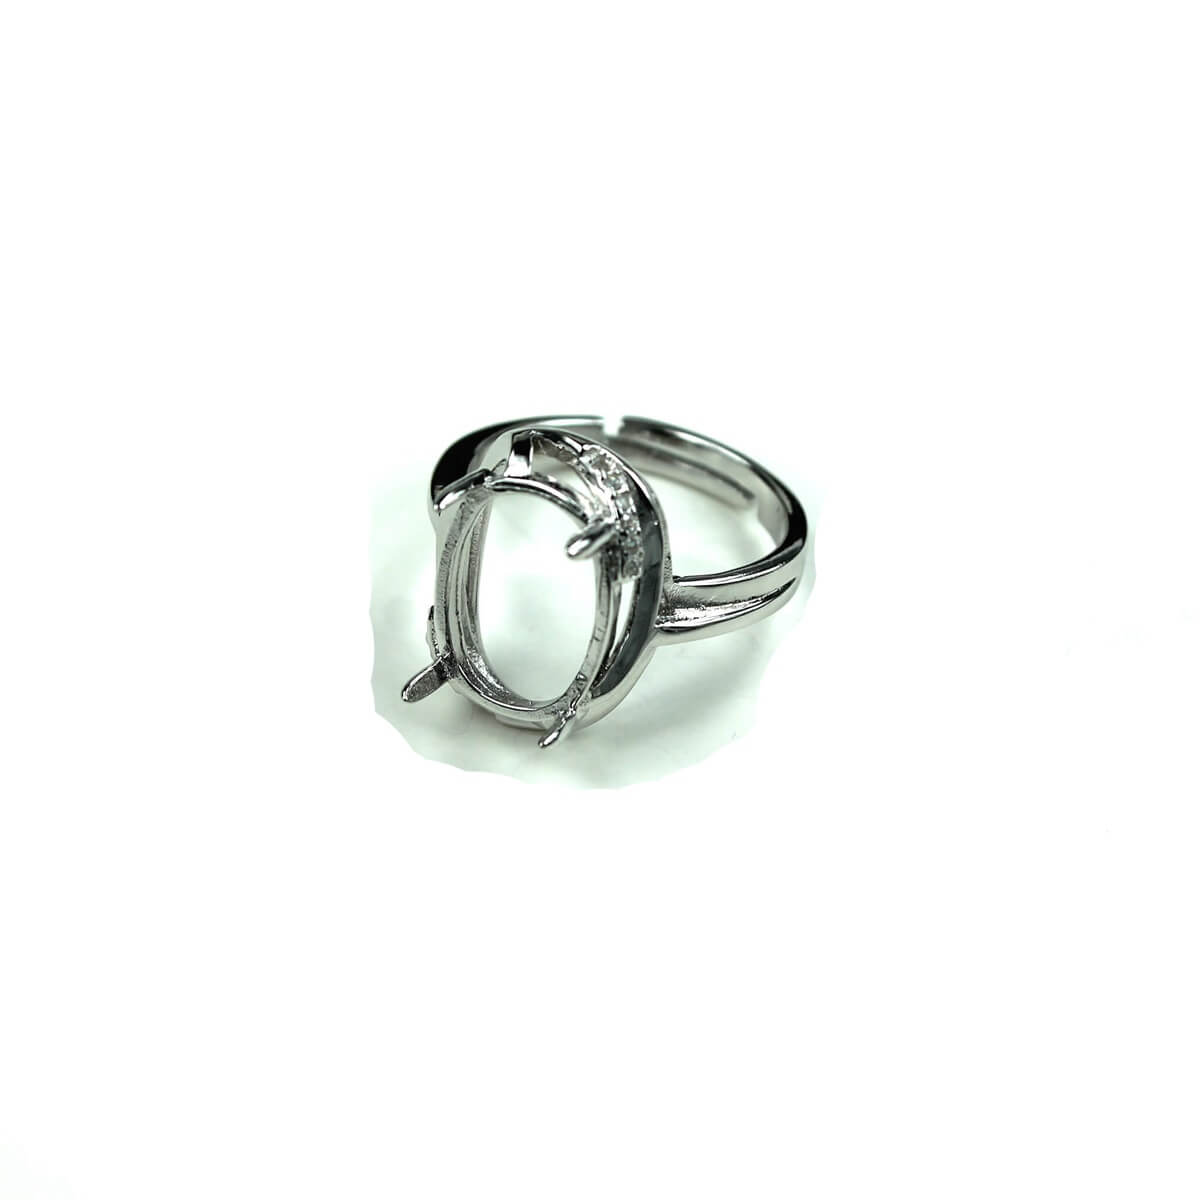 Ring with Cubic Zirconia Inlays and Oval Prongs Mounting in Sterling Silver 9x13mm 